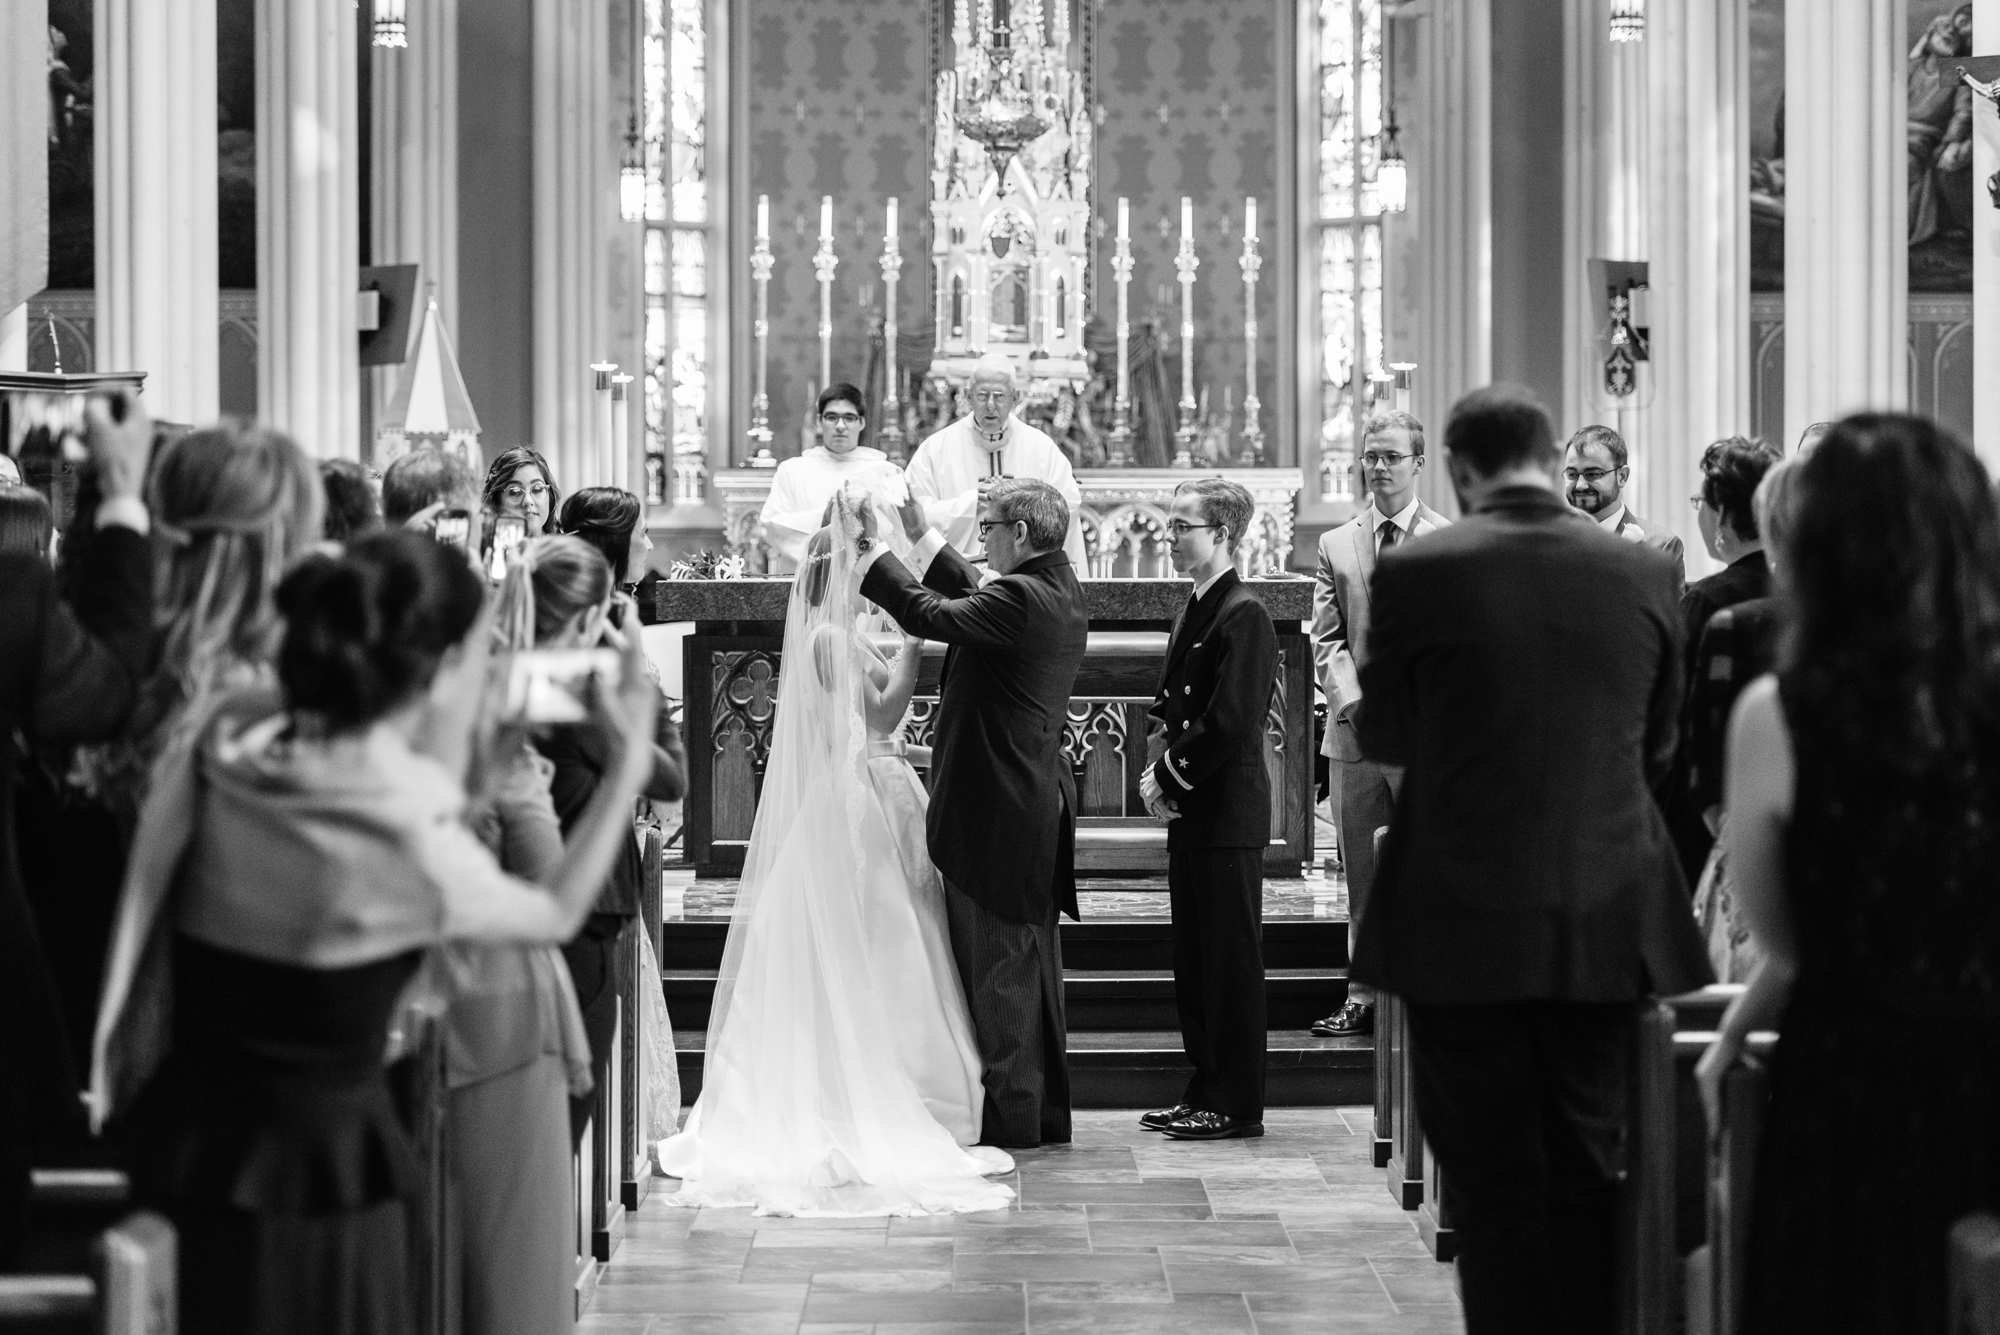 Wedding Processional at a wedding ceremony at the Basilica of the Sacred Heart on the campus of the University of Notre Dame